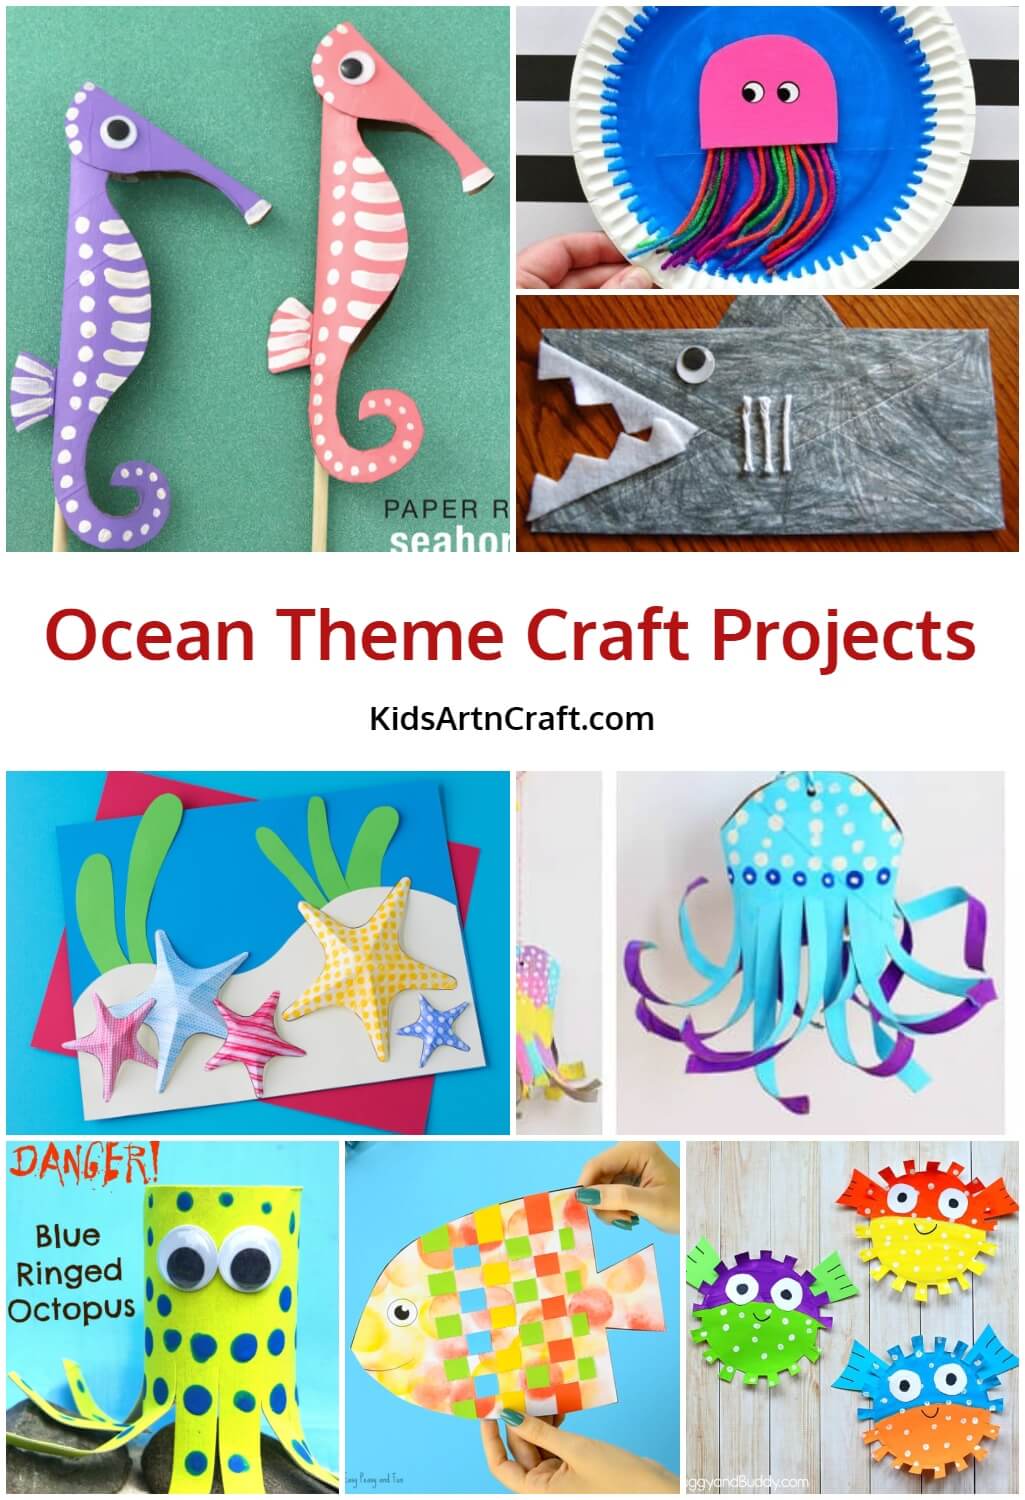 Ocean Theme Craft Projects for Kids - Kids Art & Craft